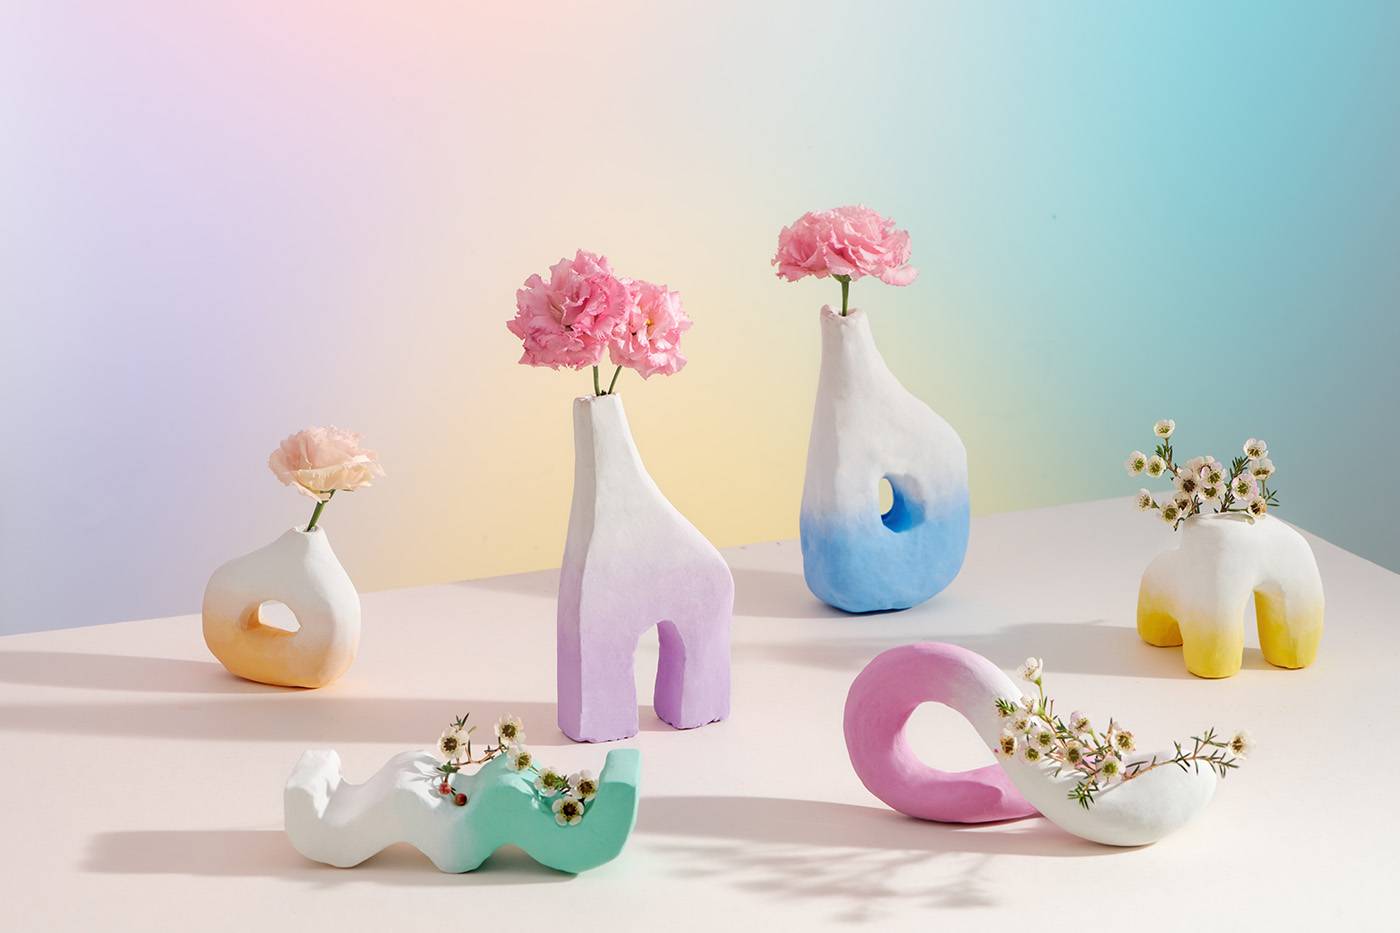 Vases Of Different Shapes Made Of Ceramic Stand On The Pedestal Against The Color Background Buttercup flower in ceramic vases and white cylinder podium on light background